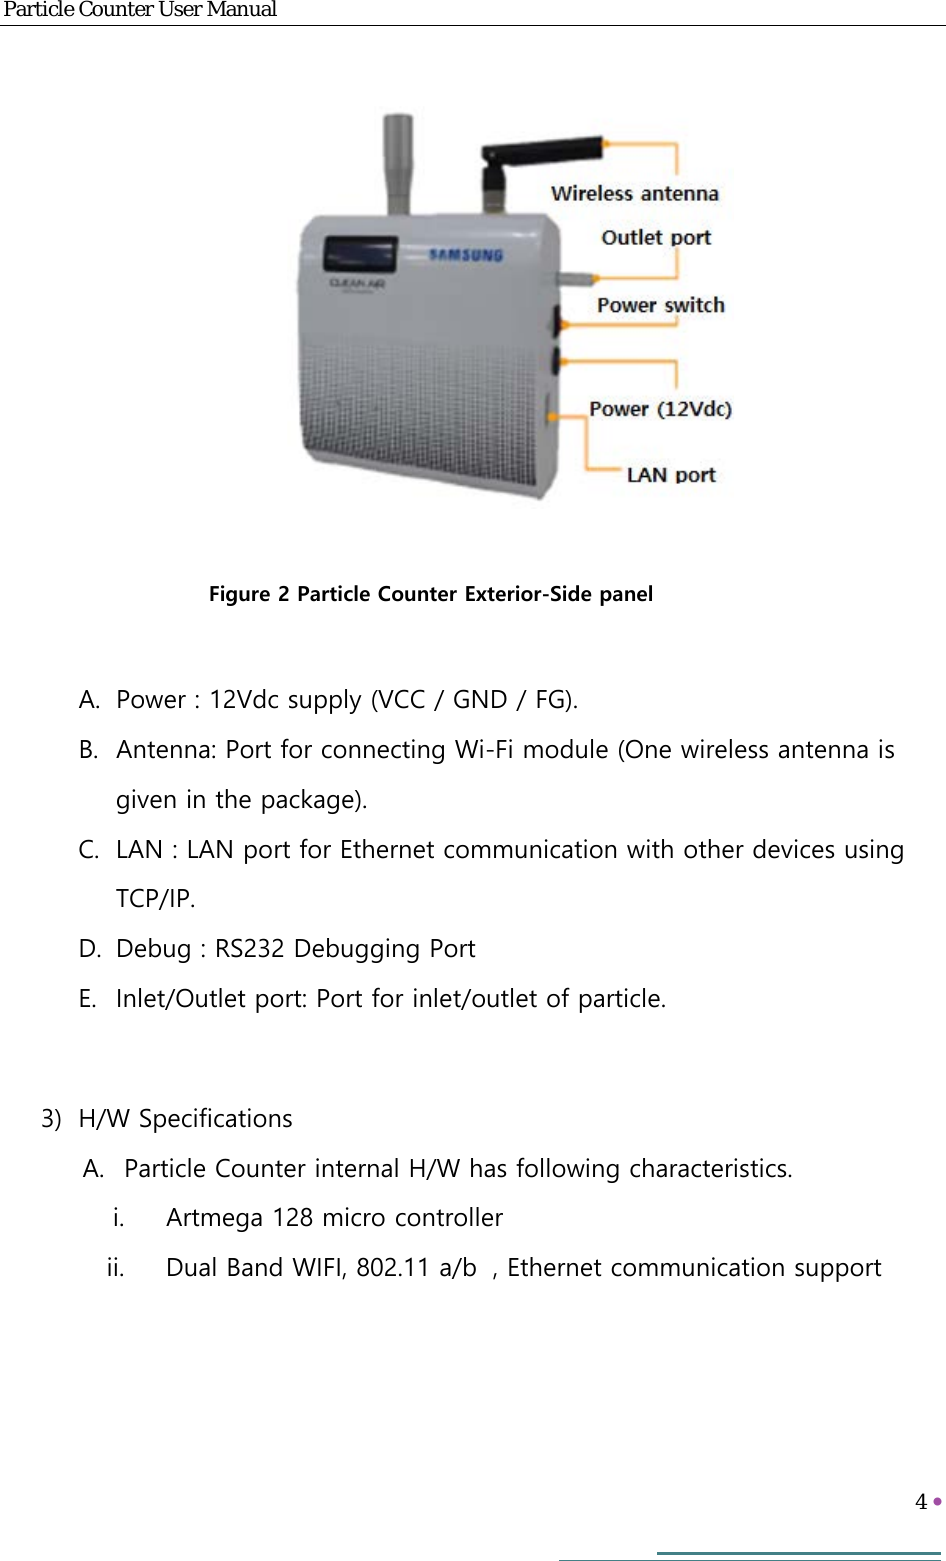 Particle Counter User Manual   4        A. Power : 12Vdc supply (VCC / GND / FG). B. Antenna: Port for connecting Wi-Fi module (One wireless antenna is given in the package). C. LAN : LAN port for Ethernet communication with other devices using TCP/IP. D. Debug : RS232 Debugging Port E. Inlet/Outlet port: Port for inlet/outlet of particle.  3) H/W Specifications A. Particle Counter internal H/W has following characteristics. i. Artmega 128 micro controller ii. Dual Band WIFI, 802.11 a/b , Ethernet communication support    Figure 2 Particle Counter Exterior-Side panel 